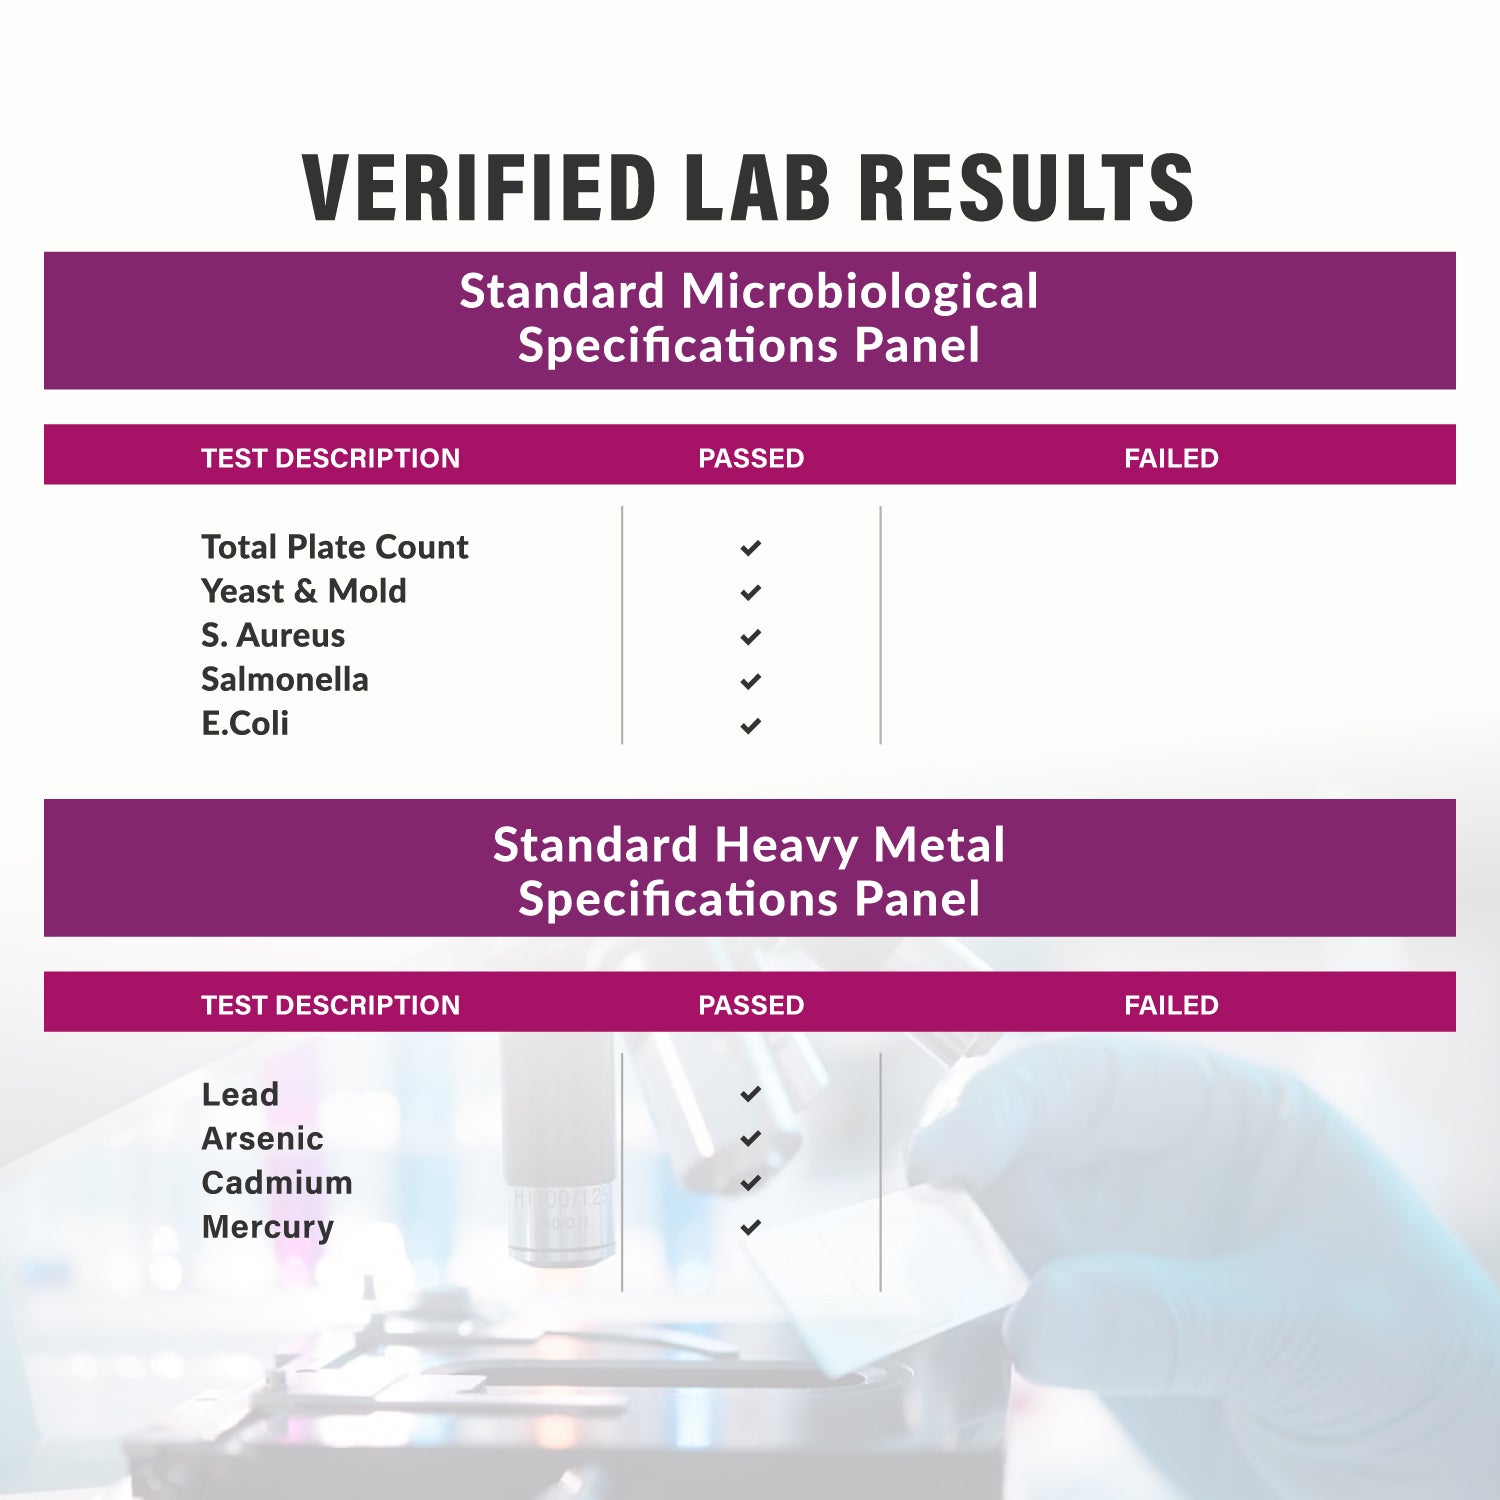 Verified lab results